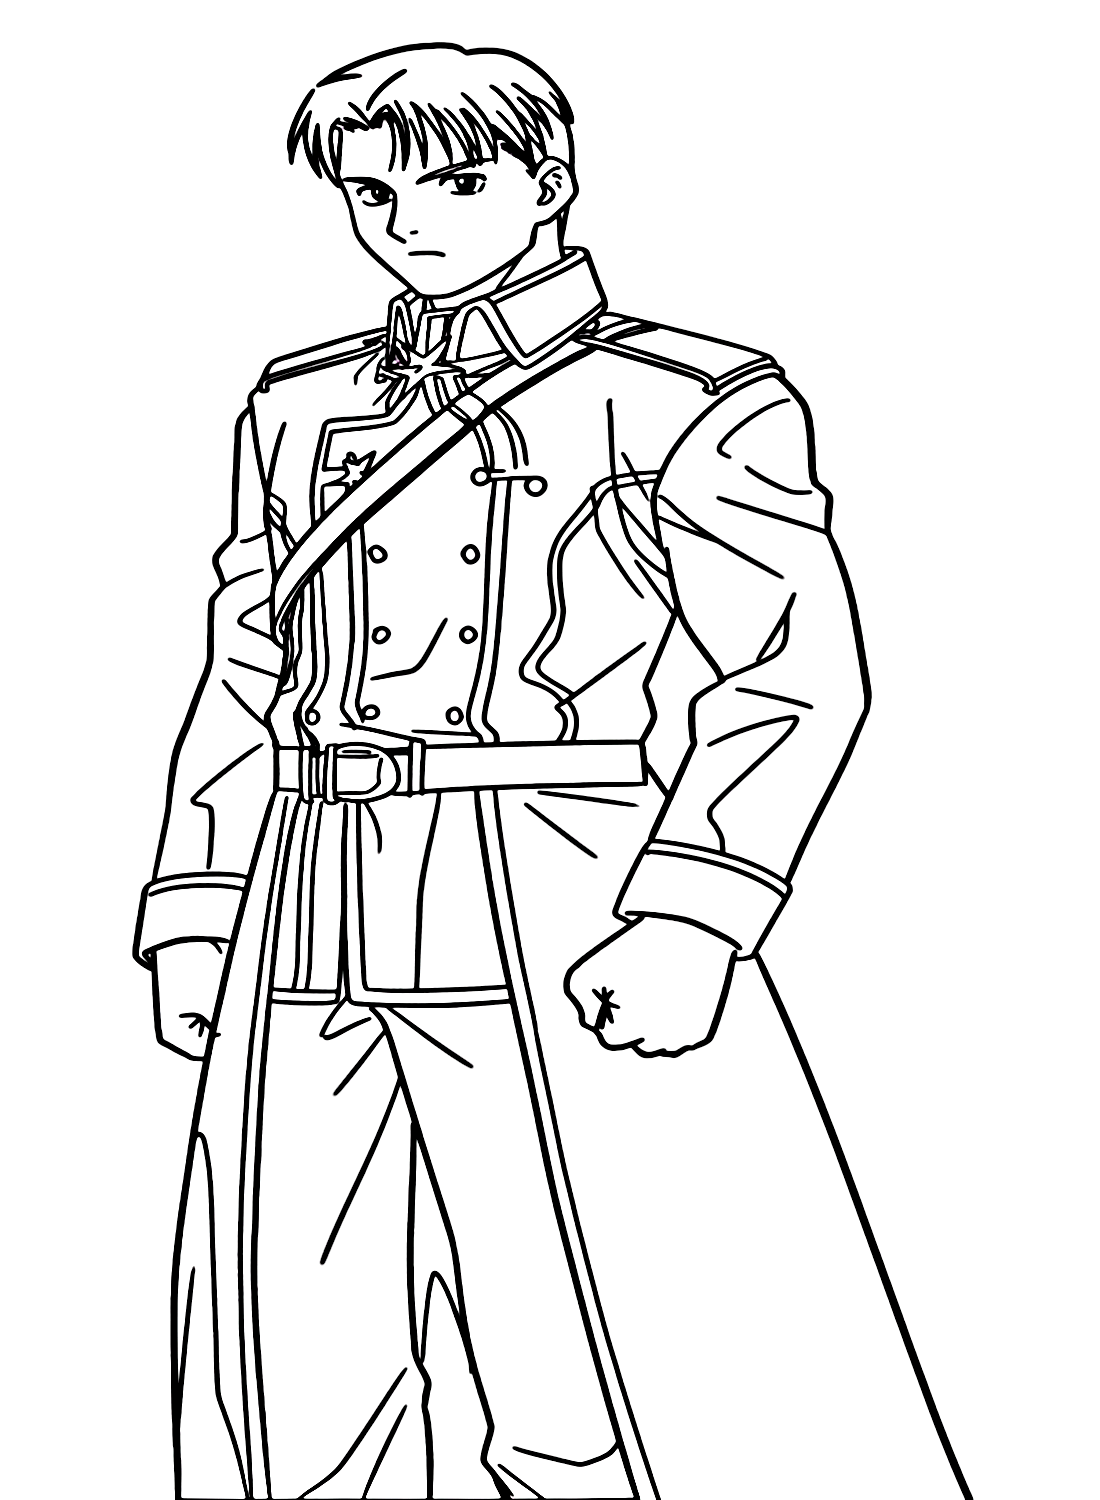 Roy Mustang in Military Uniform Coloring Page from Roy Mustang